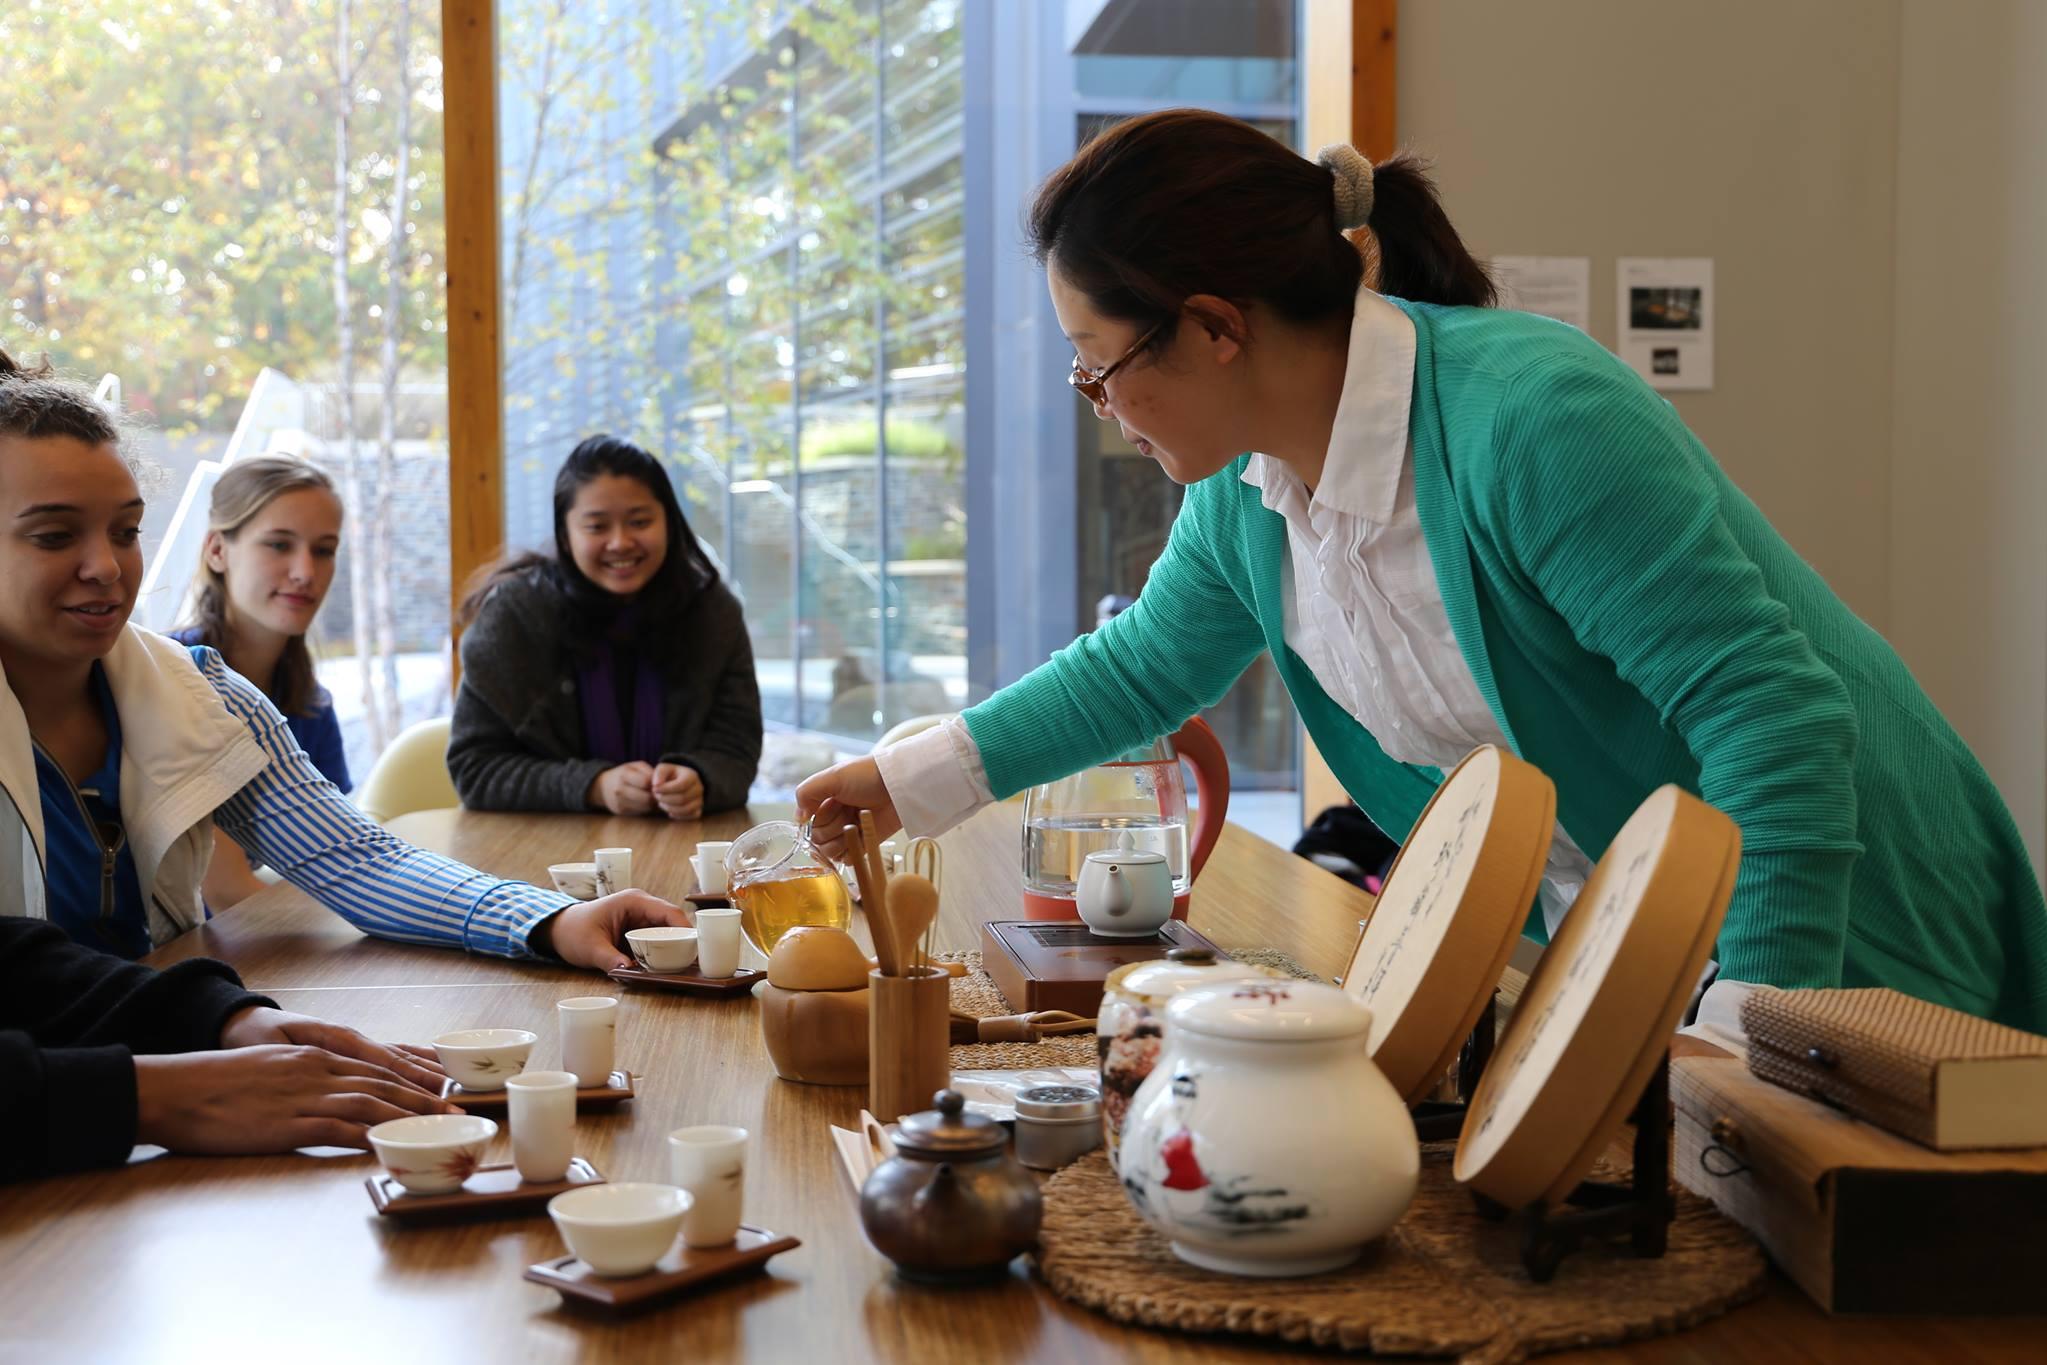 In partnership with Duke CommuniTEA, this wellness experience allows you to gain a deeper understanding of wellness through tea culture.   You will have the opportunity to interact through the medium of tea appreciation in a space that promotes relaxation and self-care.  This group meets every Sunday & Thursday from 5:00pm - 5:50pm in Oasis West, Room 128 in the Student Wellness Center.